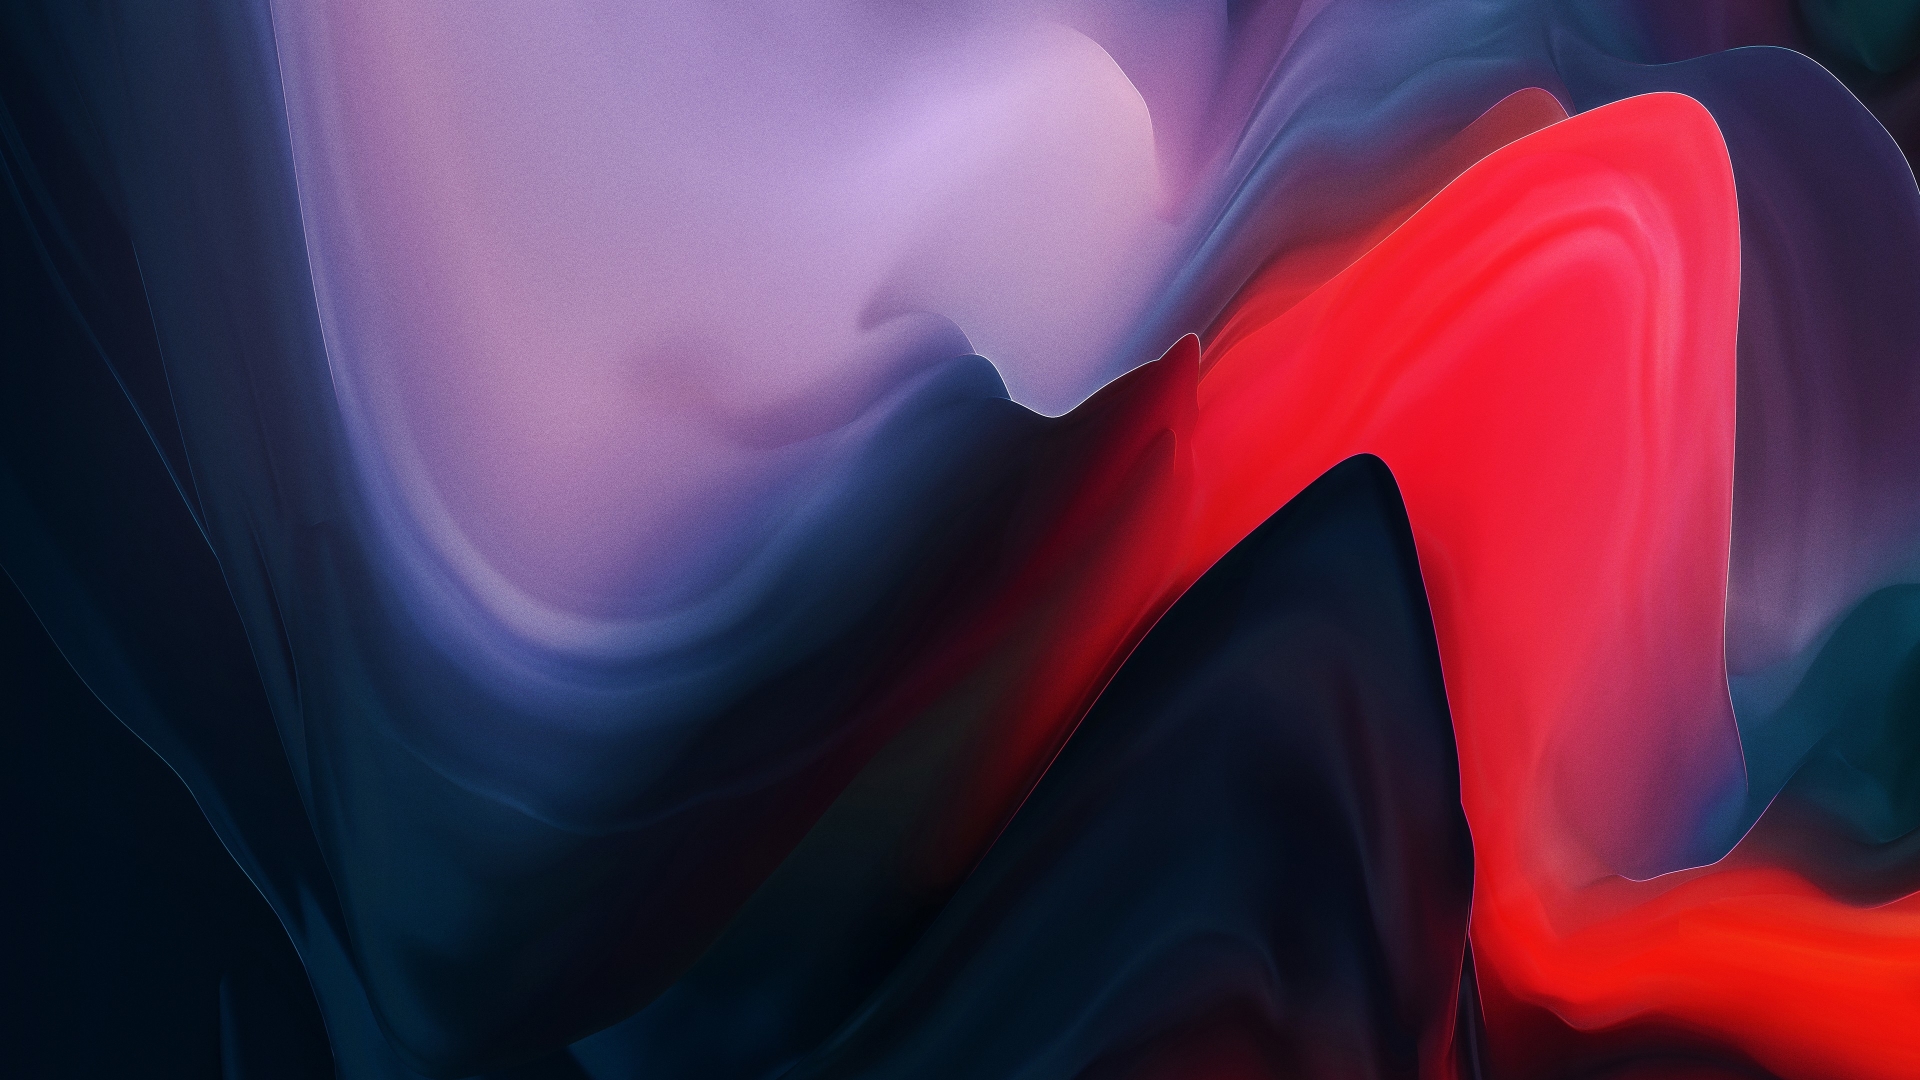 1920x1080 Oneplus 6t Abstract 1080p Laptop Full Hd Wallpaper Hd